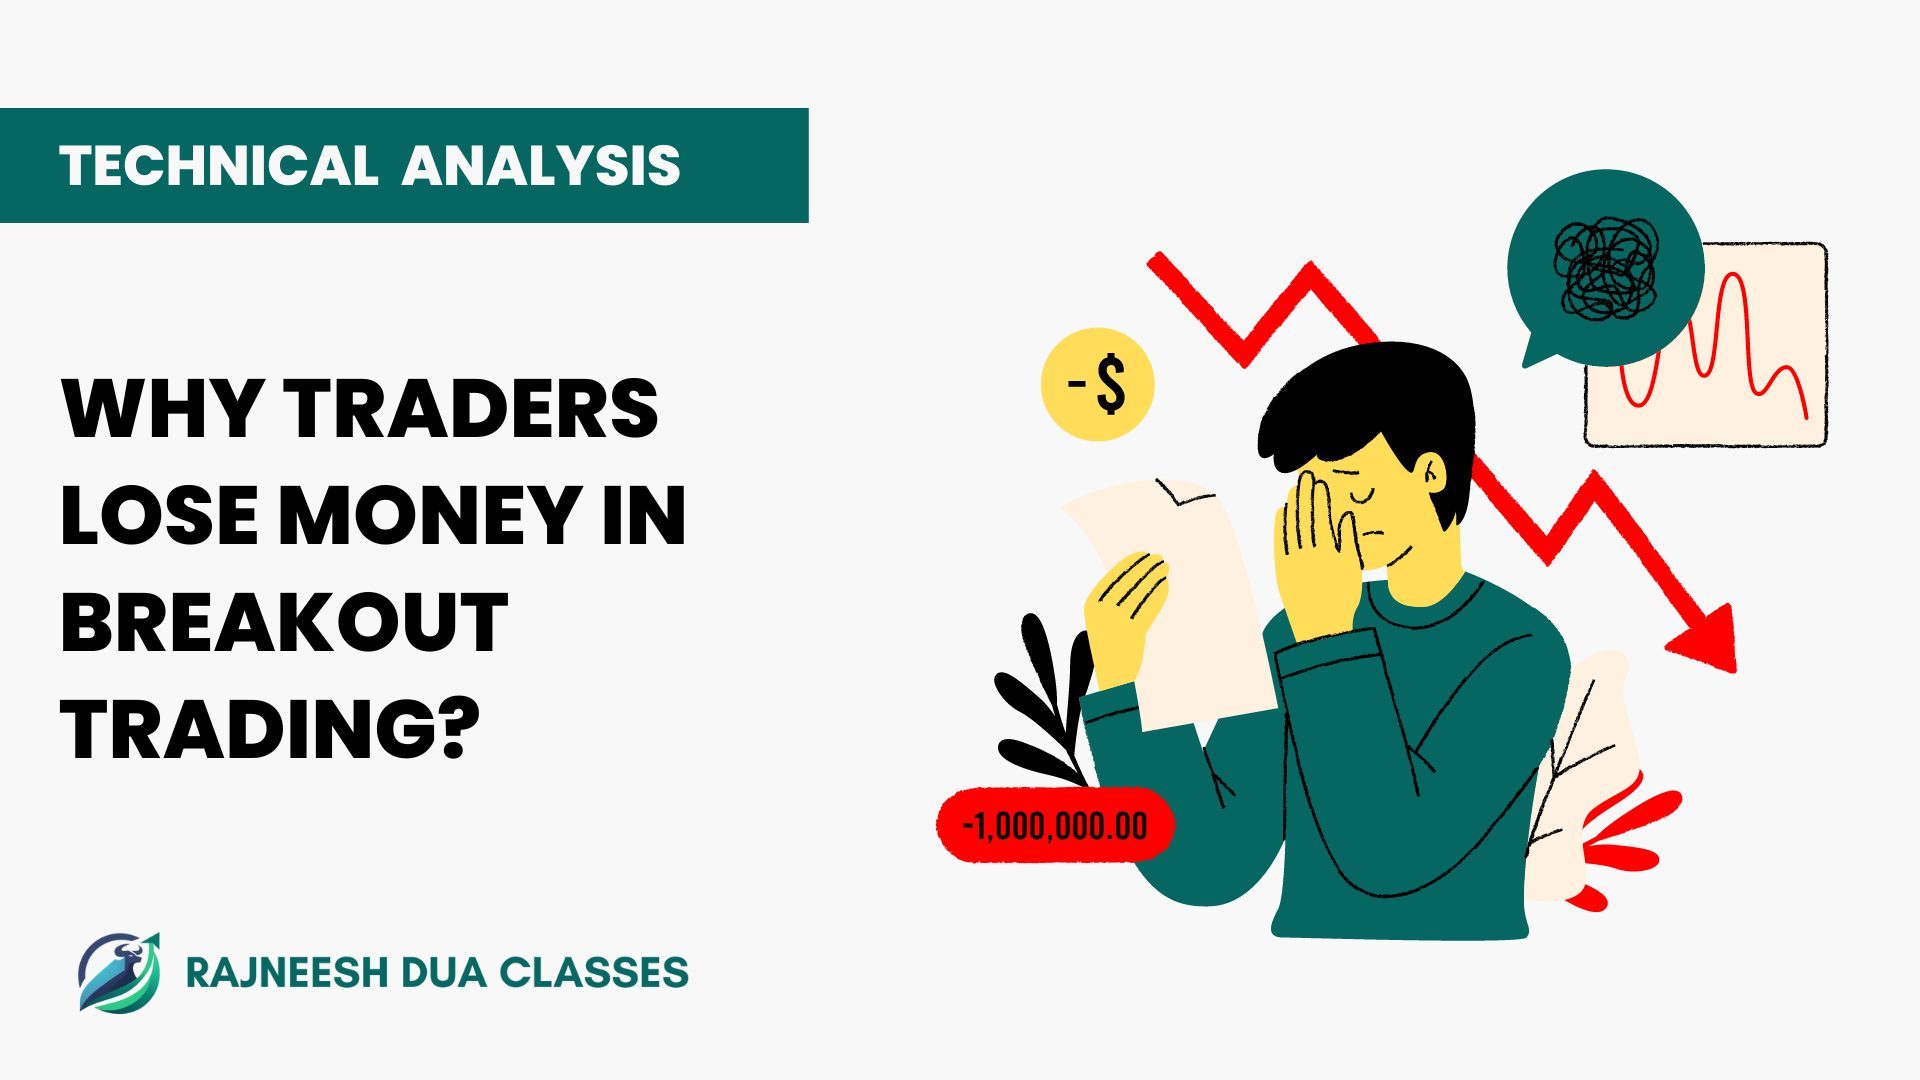 Why Traders lose money in Breakout Trading?